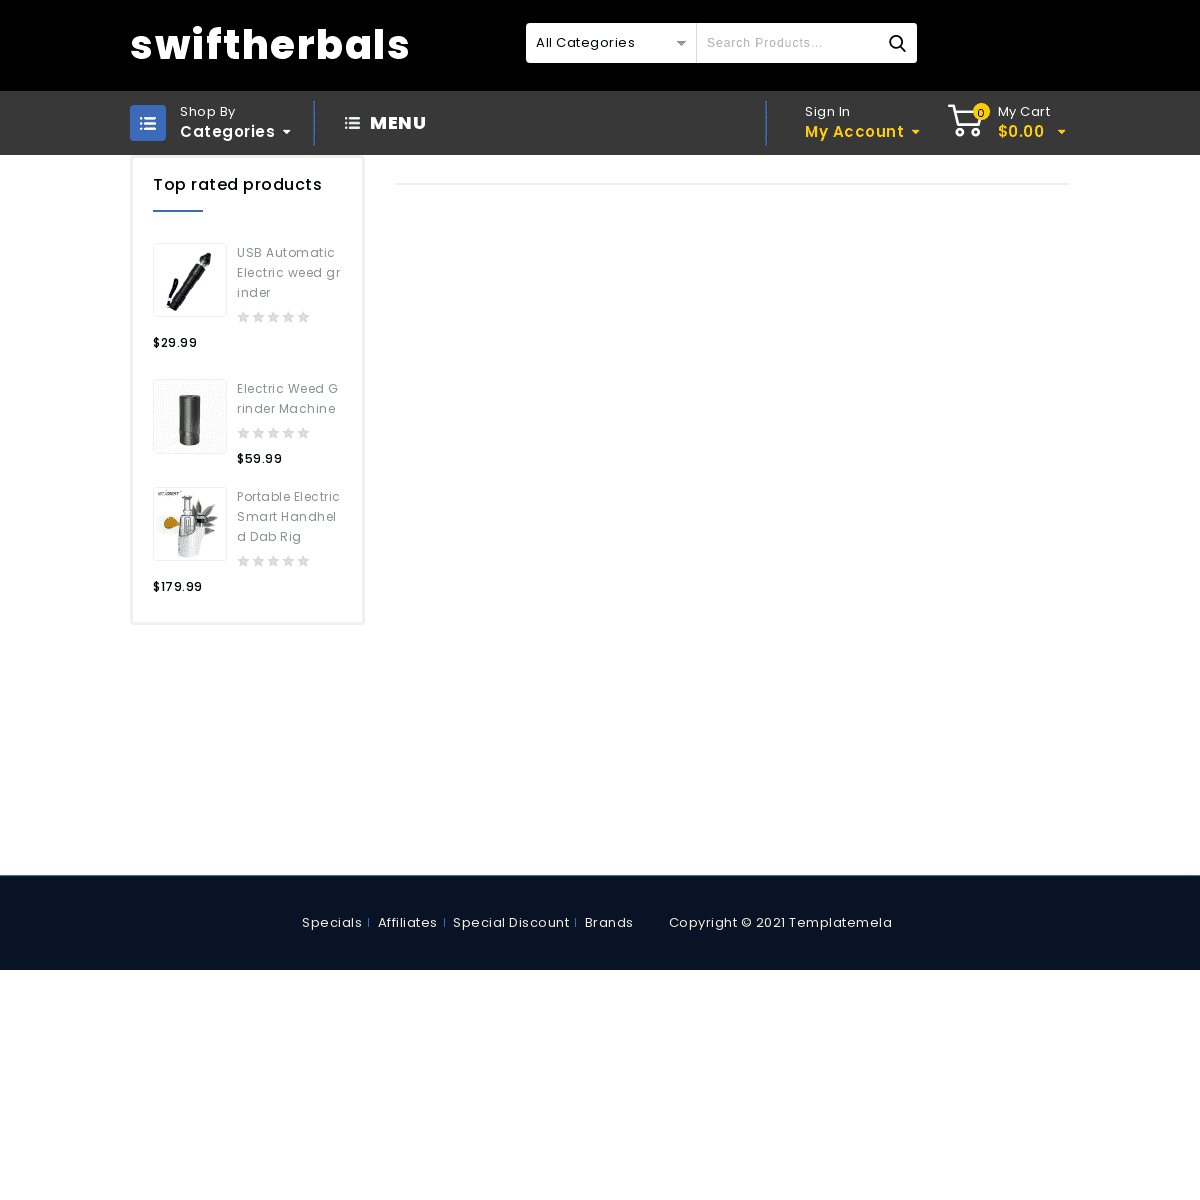 A complete backup of https://swiftherbals.com